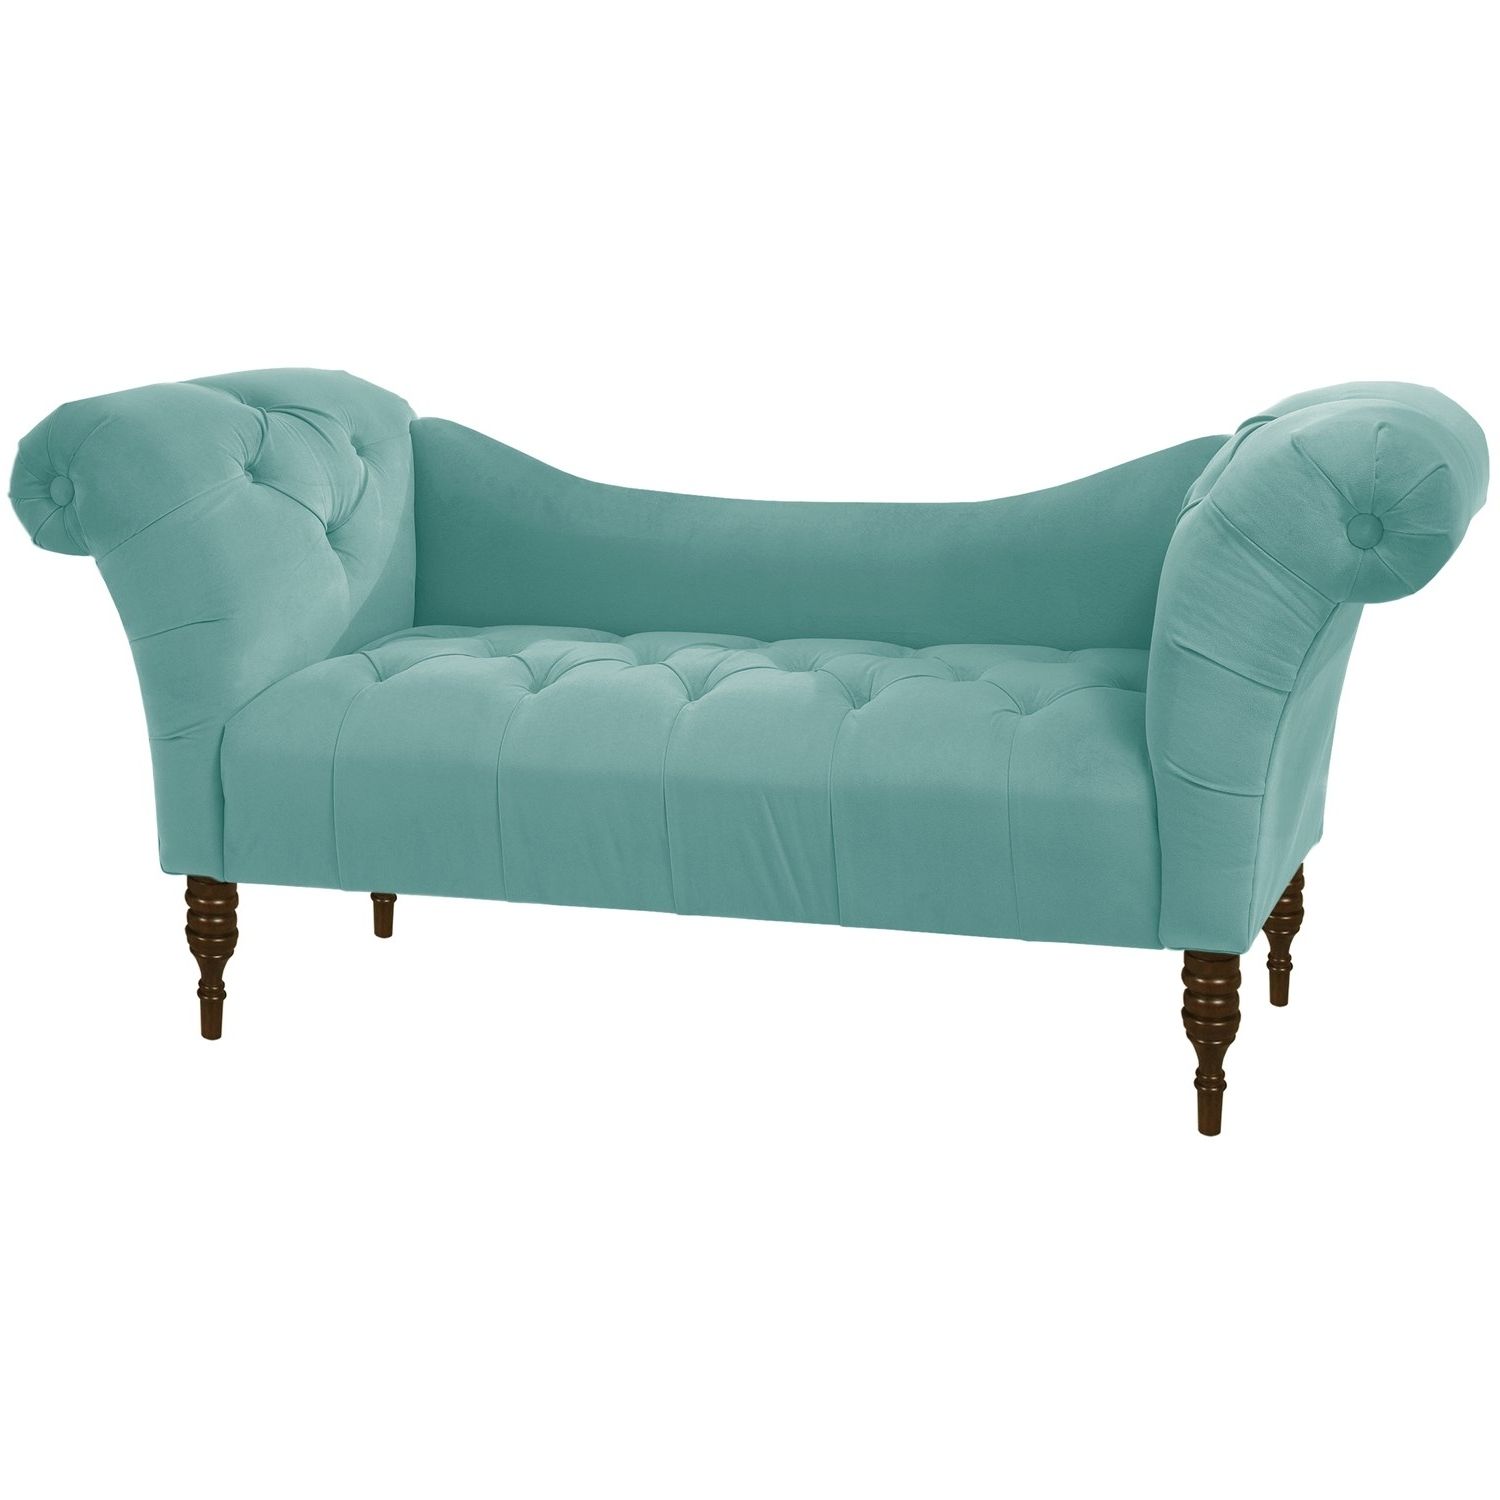 Trendy Turquoise Chaise Lounges Within Skyline 6006Vlv Tufted Chaise Lounge – Homeclick (View 8 of 15)